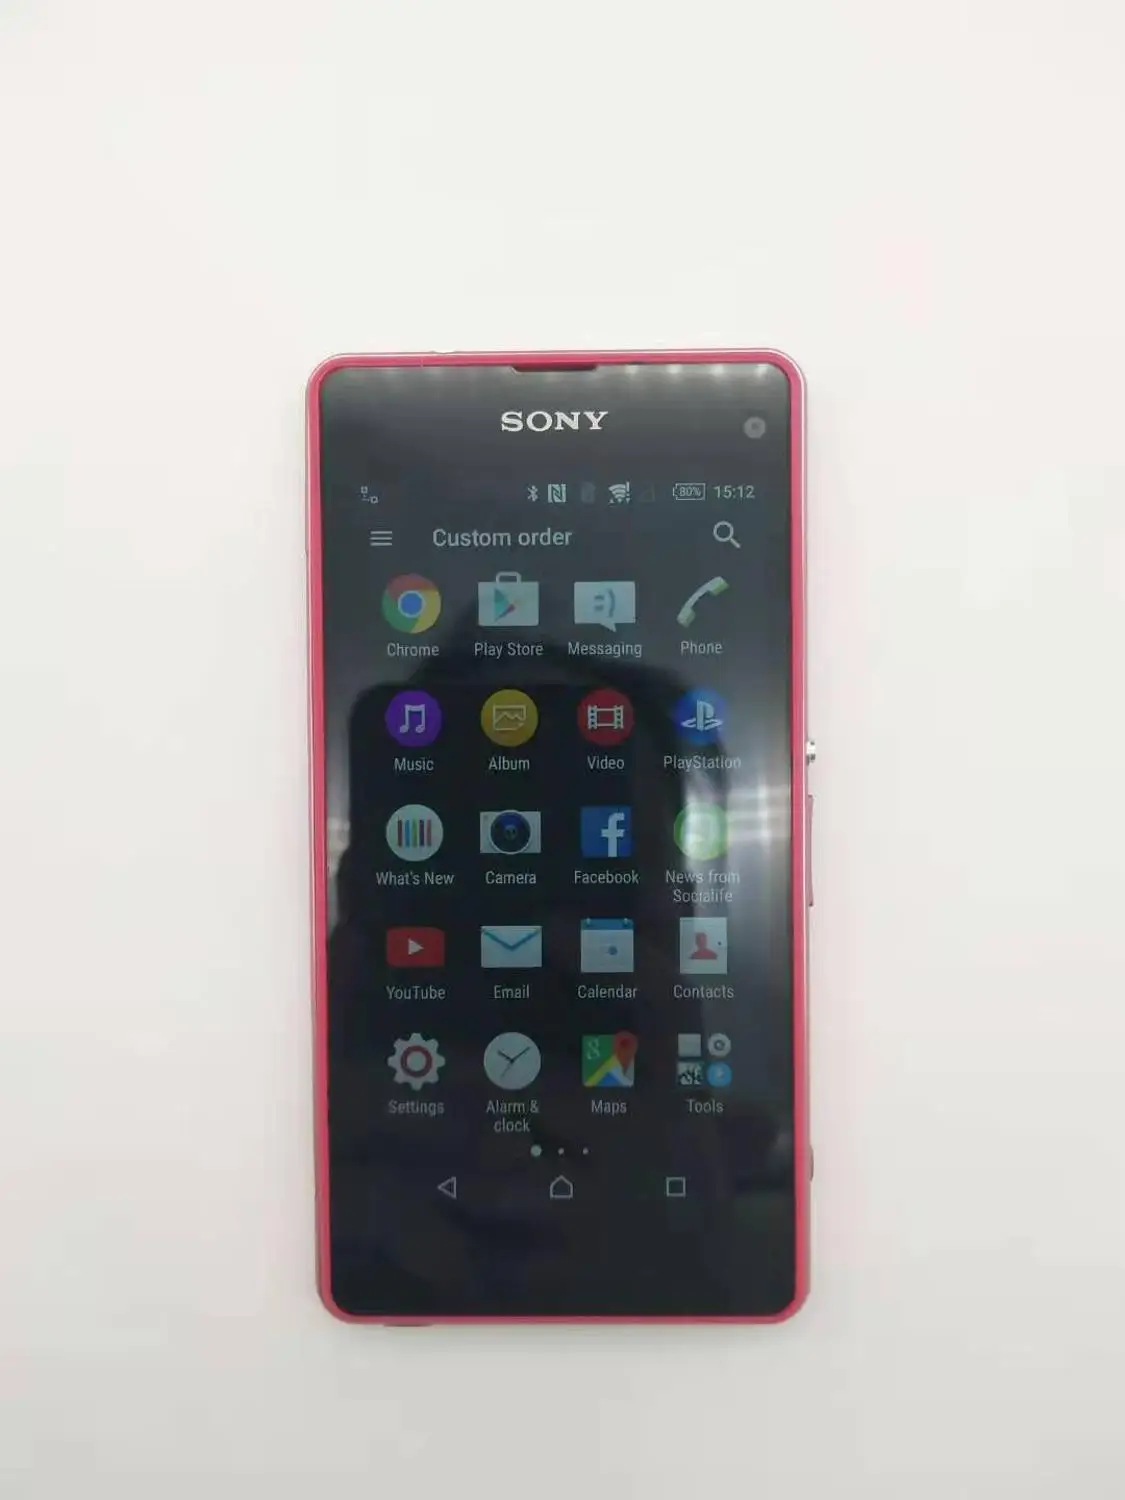 sony xperia z1 compact refurbished original d5503 unlocked 3g4g android quad core 2gb ram 4 3 20 7mp wifi gps 16gb phone free global shipping